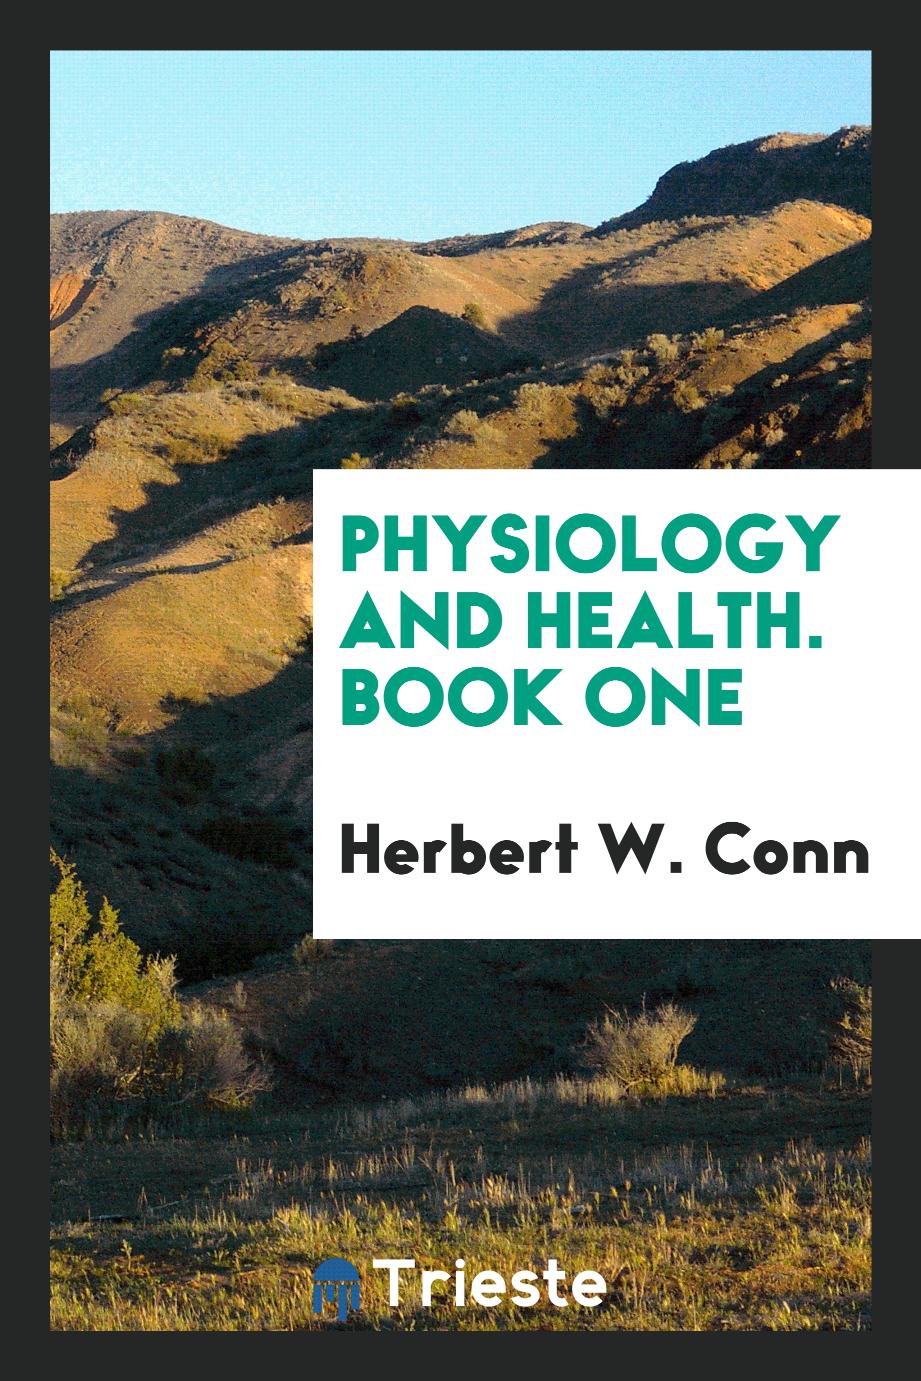 Physiology and Health. Book One